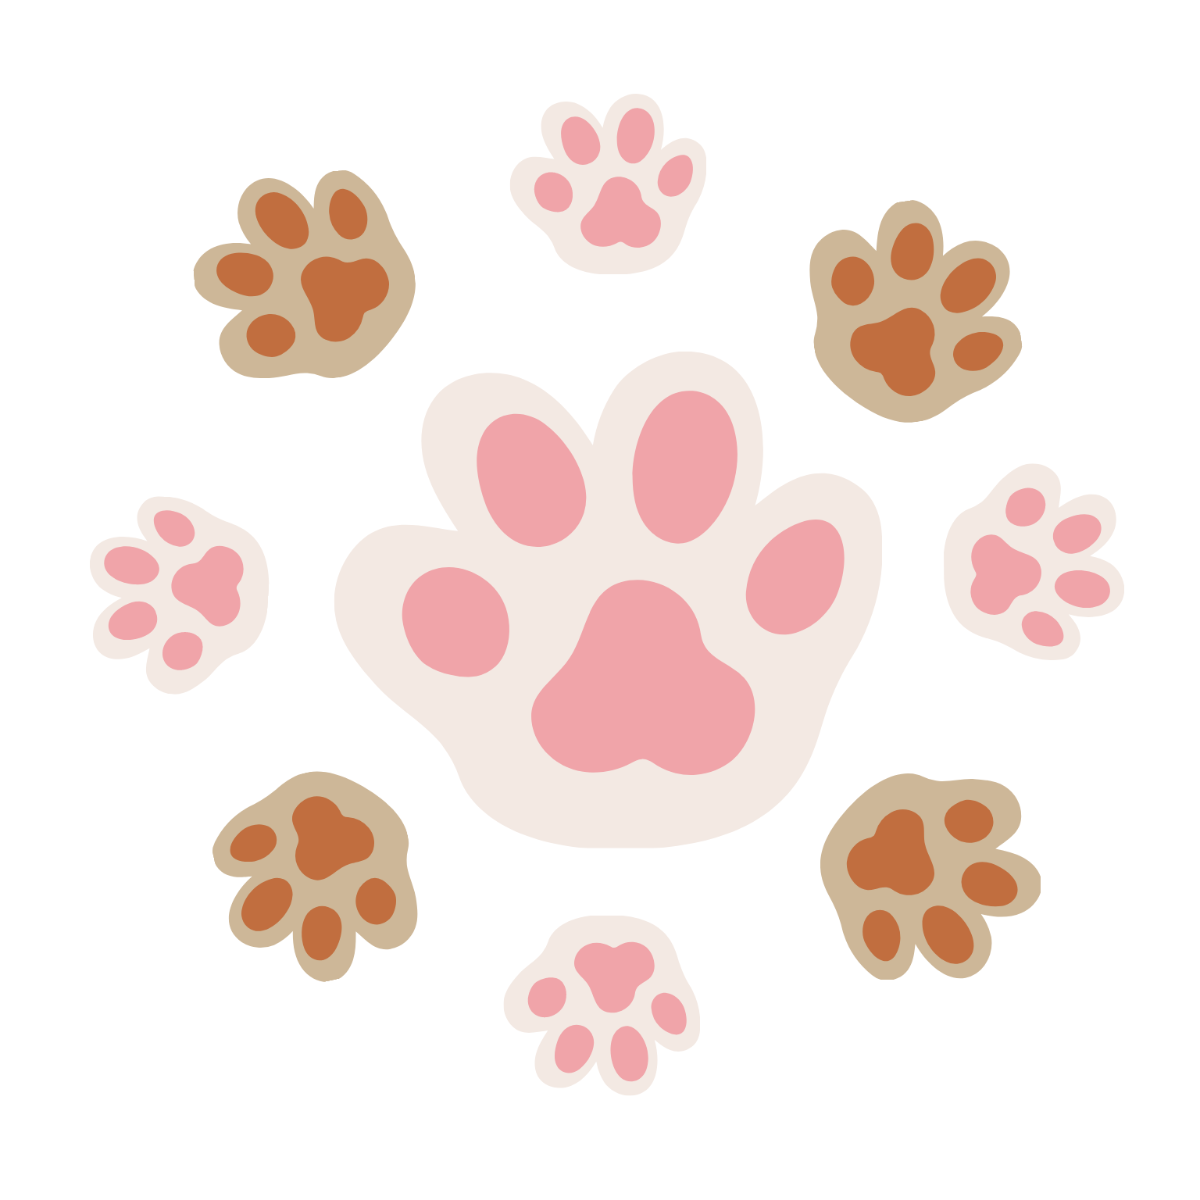 Paw Print Vector Template